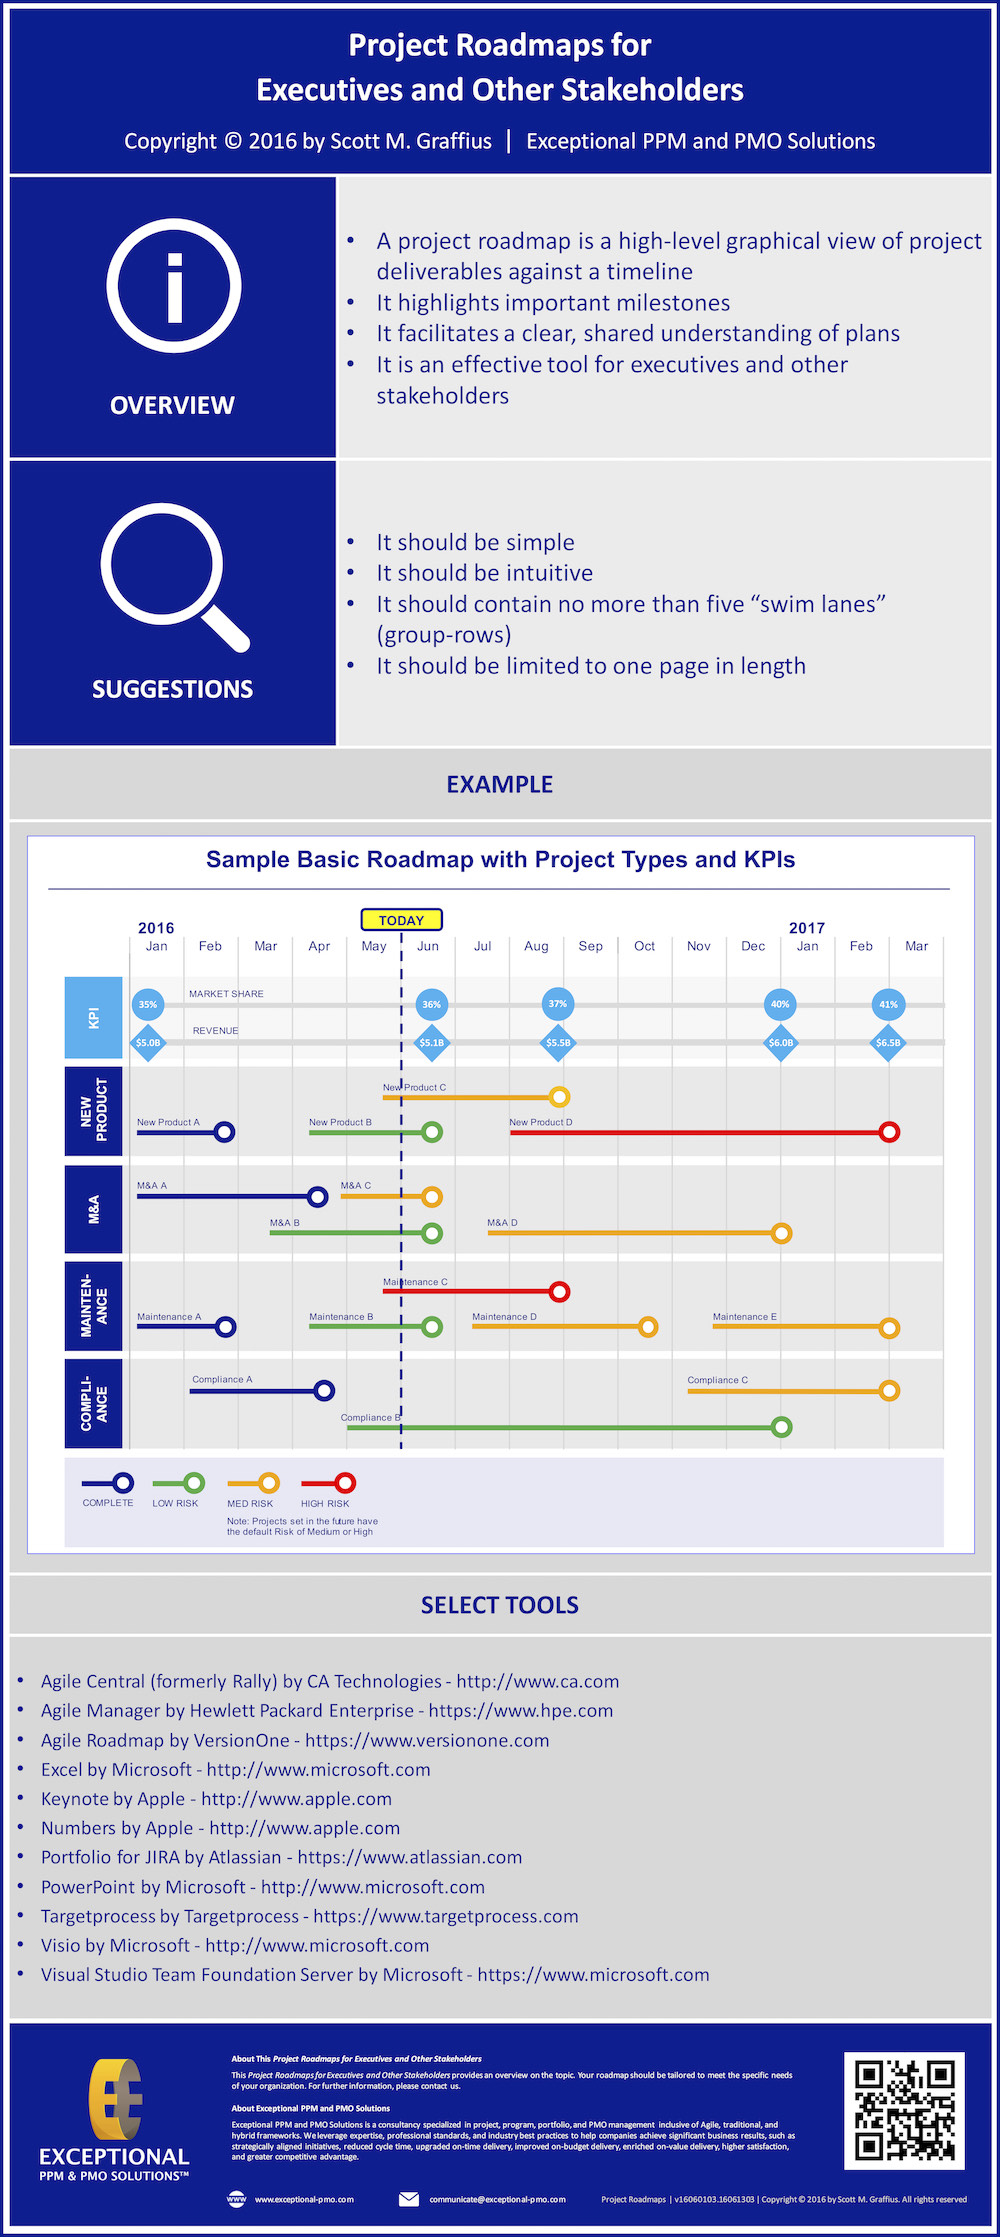 Scott-Graffius-Exceptional-PPM-and-PMO-Solutions-Infographic-Roadmaps-LR-SQ